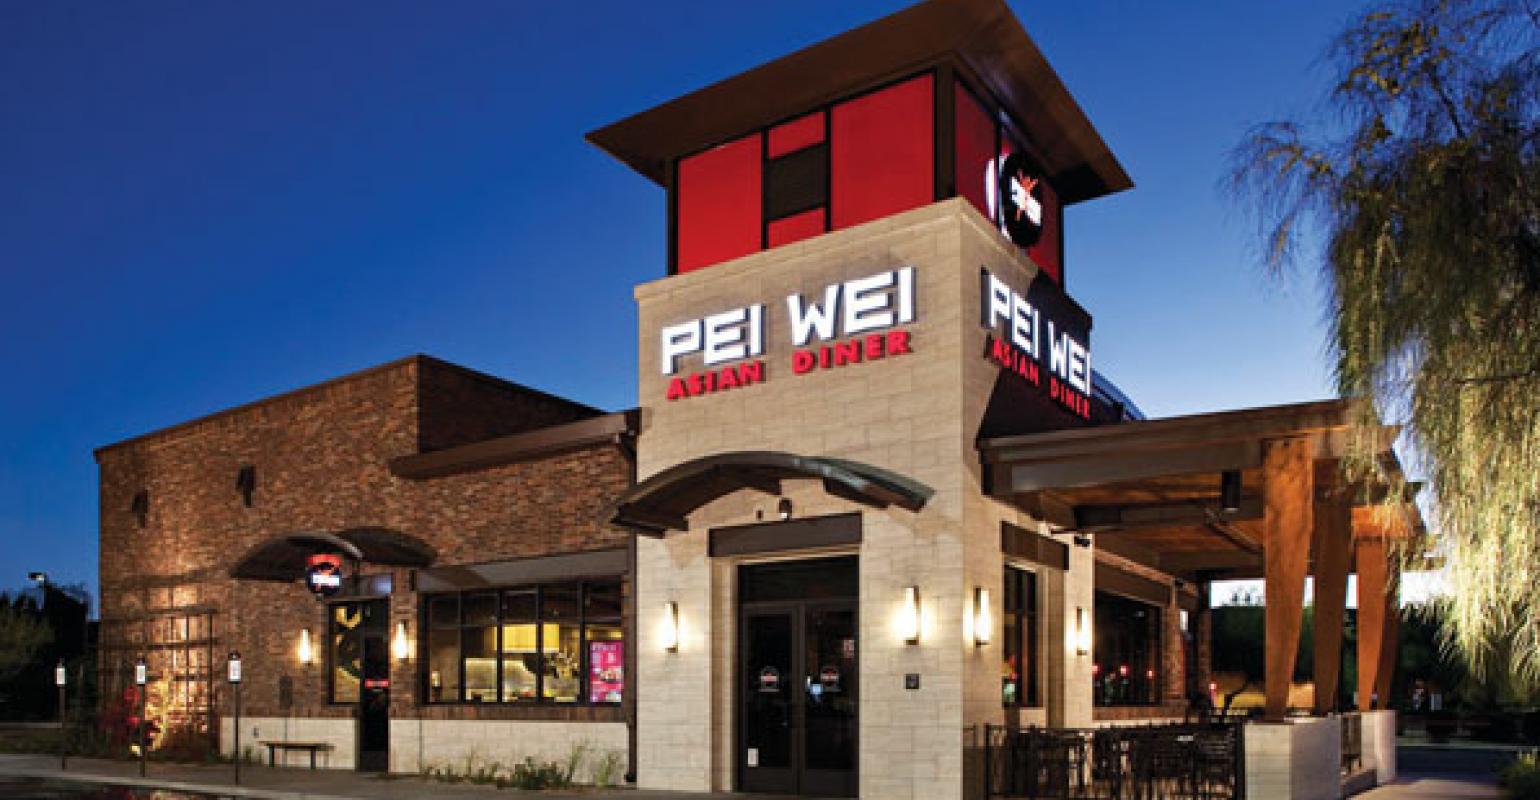 Pei Wei menu prices featuring 179 items ranging from $0.99 to $9.99